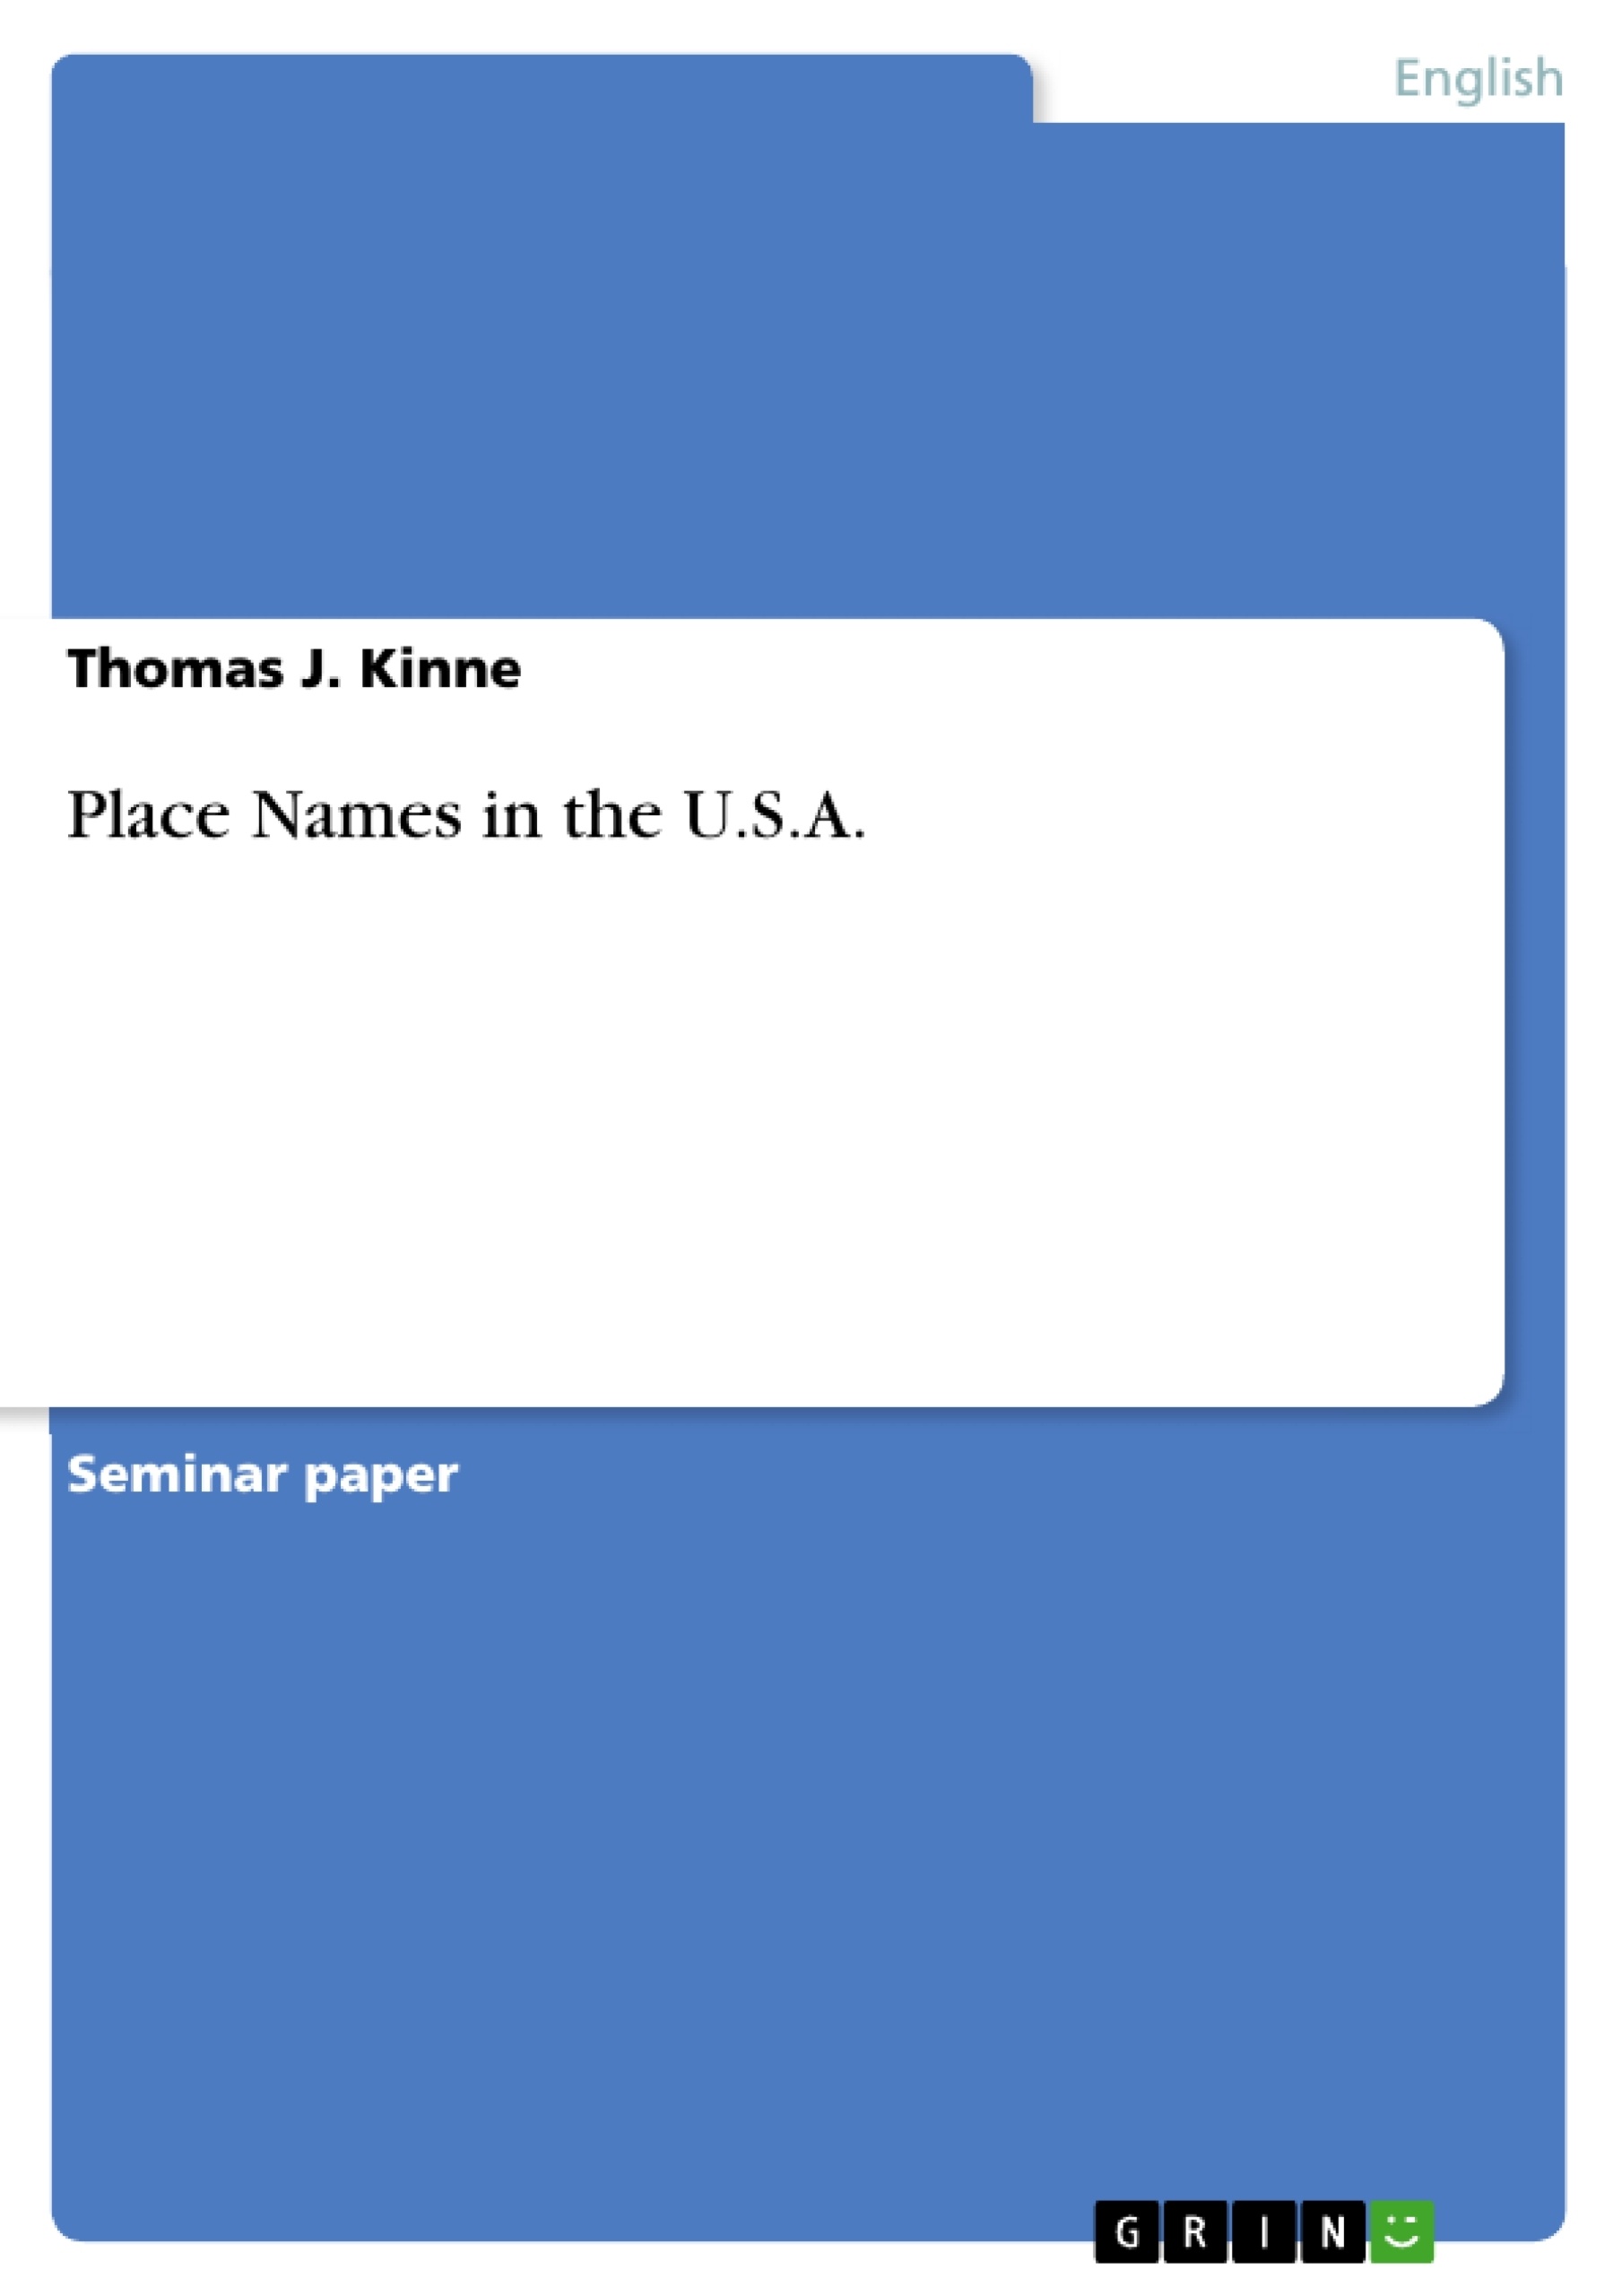 Title: Place Names in the U.S.A.